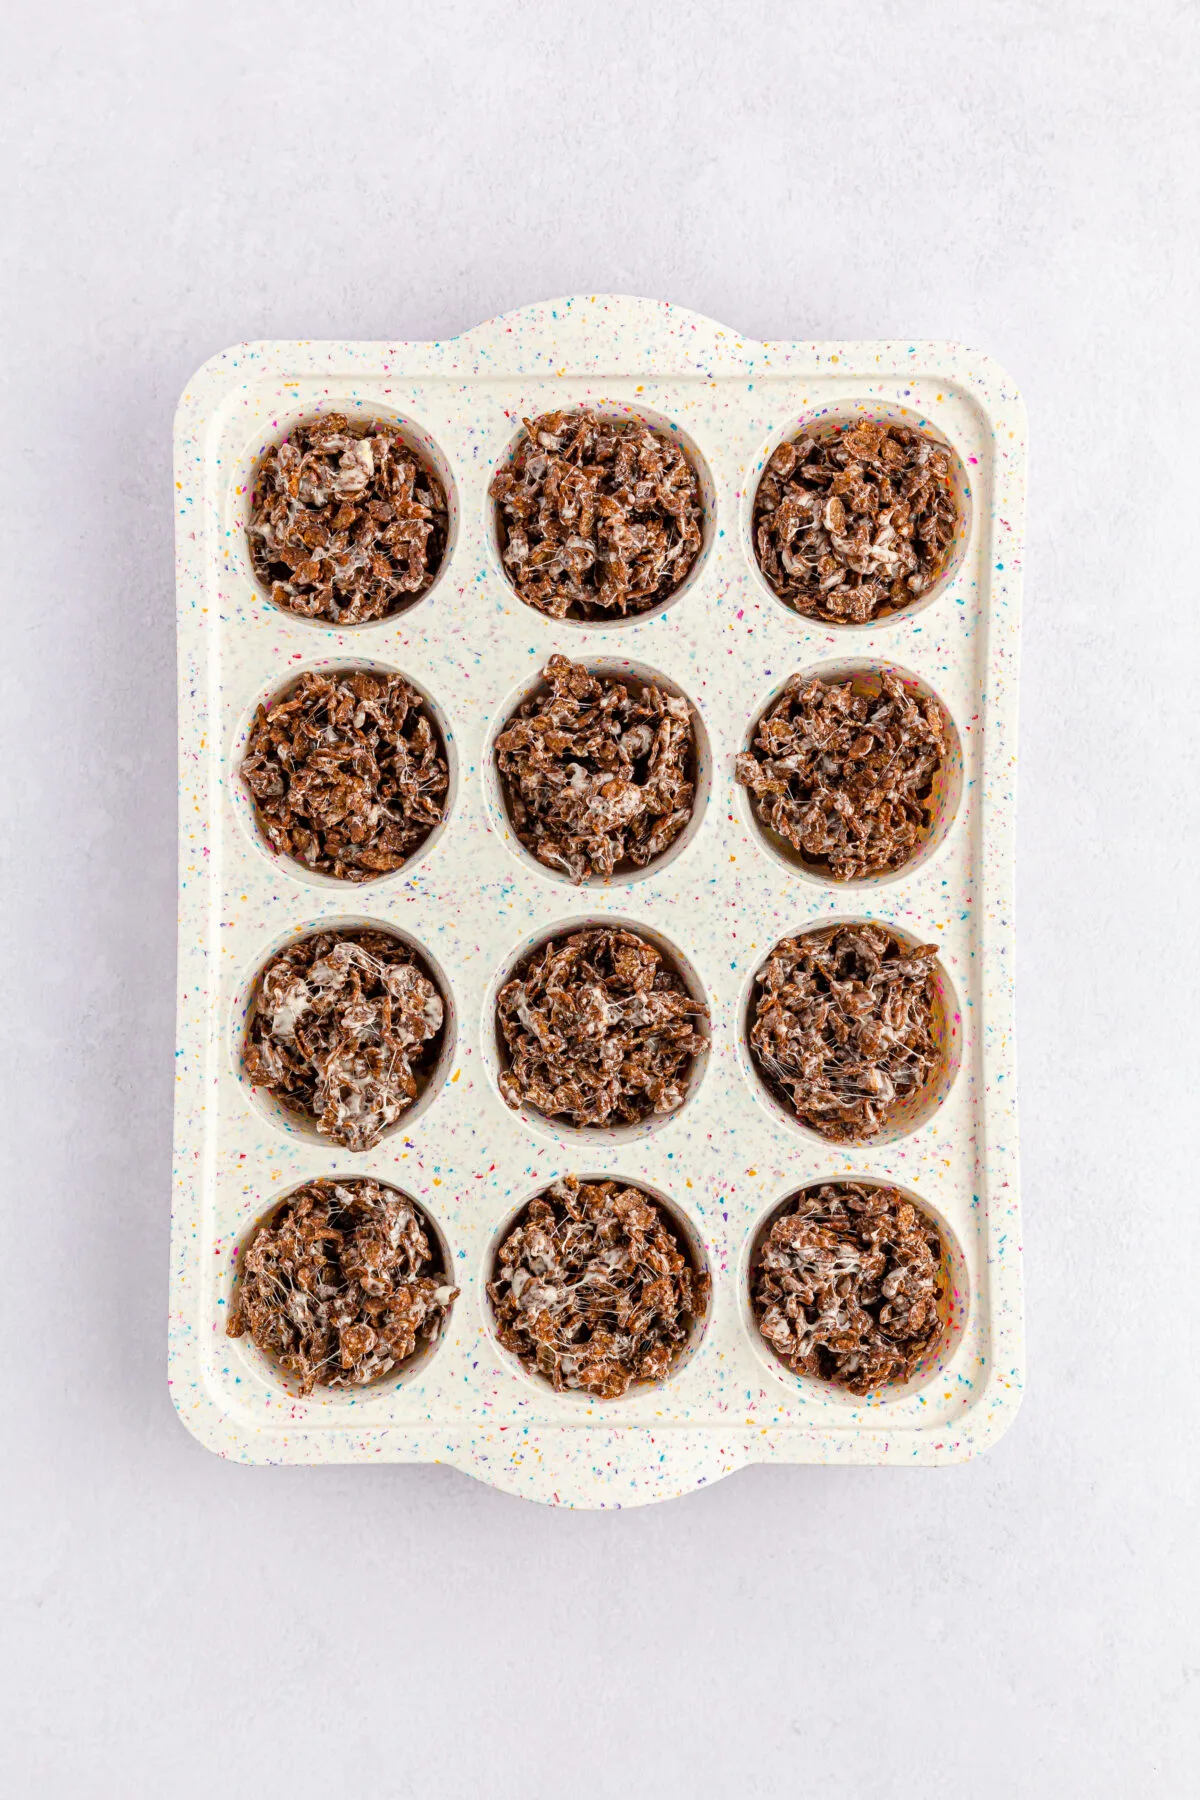 Cocoa pebbles mixture pressed into a muffin pan.